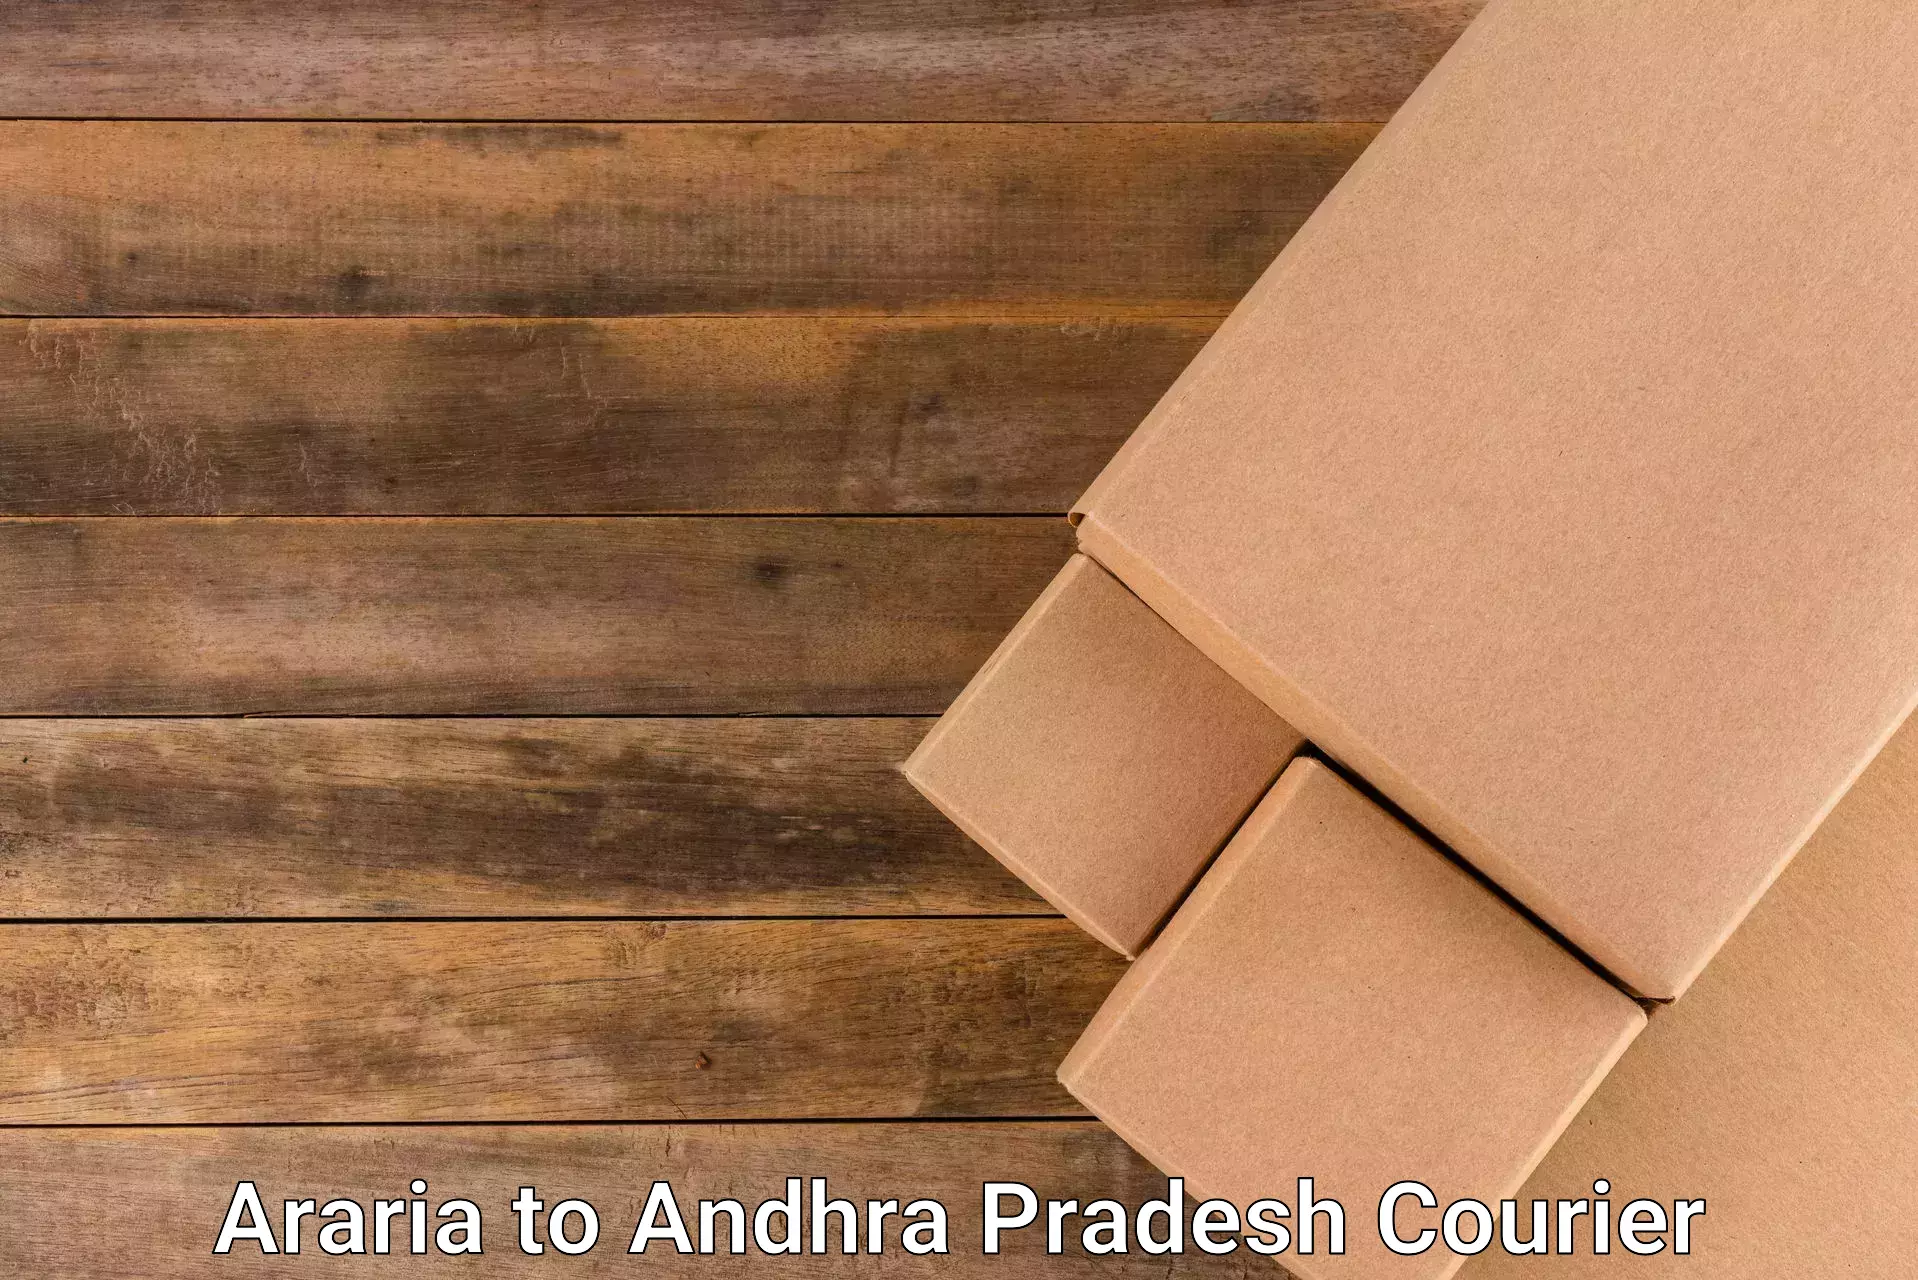 Express package handling Araria to Addateegala